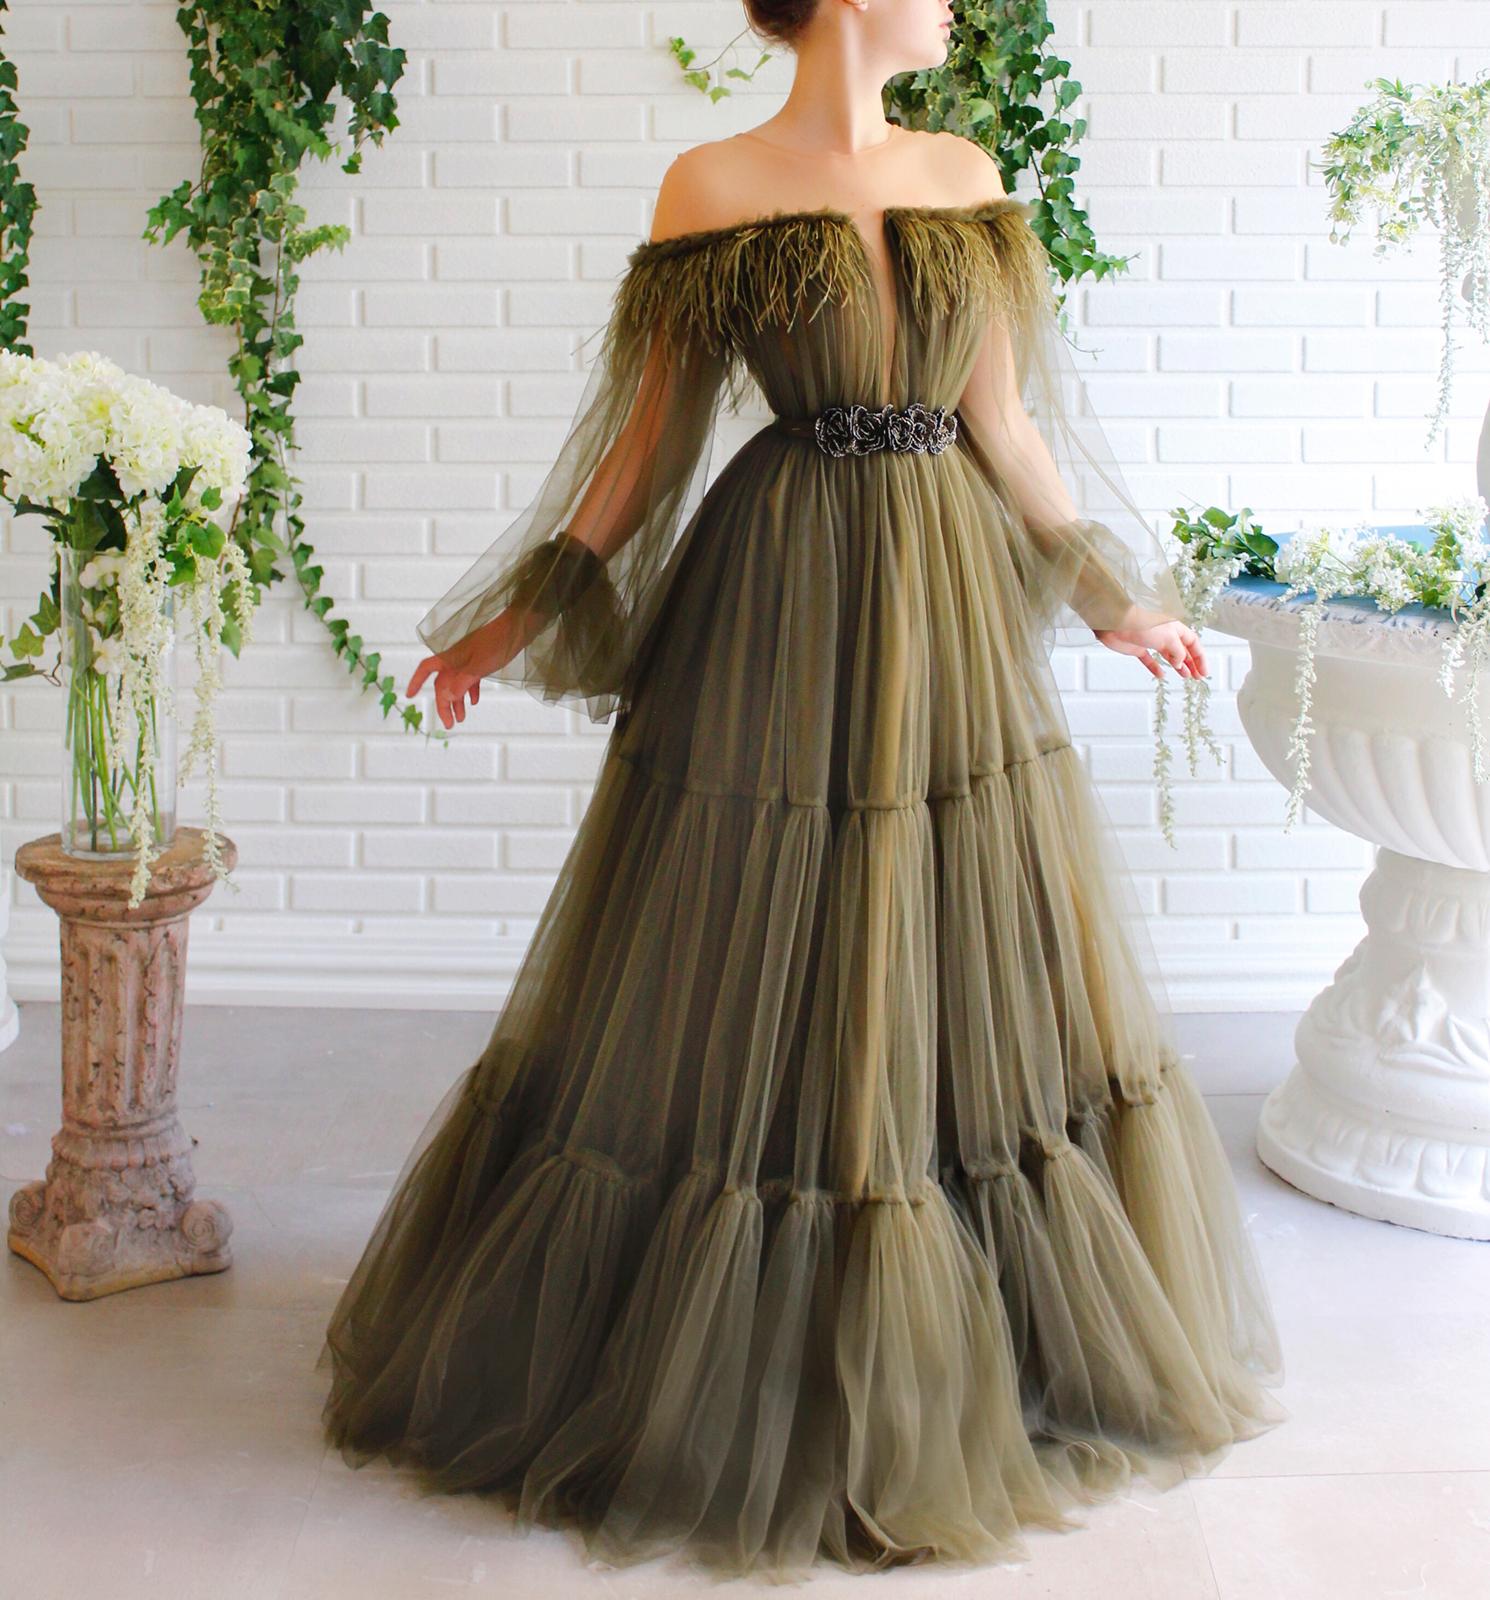 Green A-Line dress with off the shoulder sleeves, embroidery and feathers